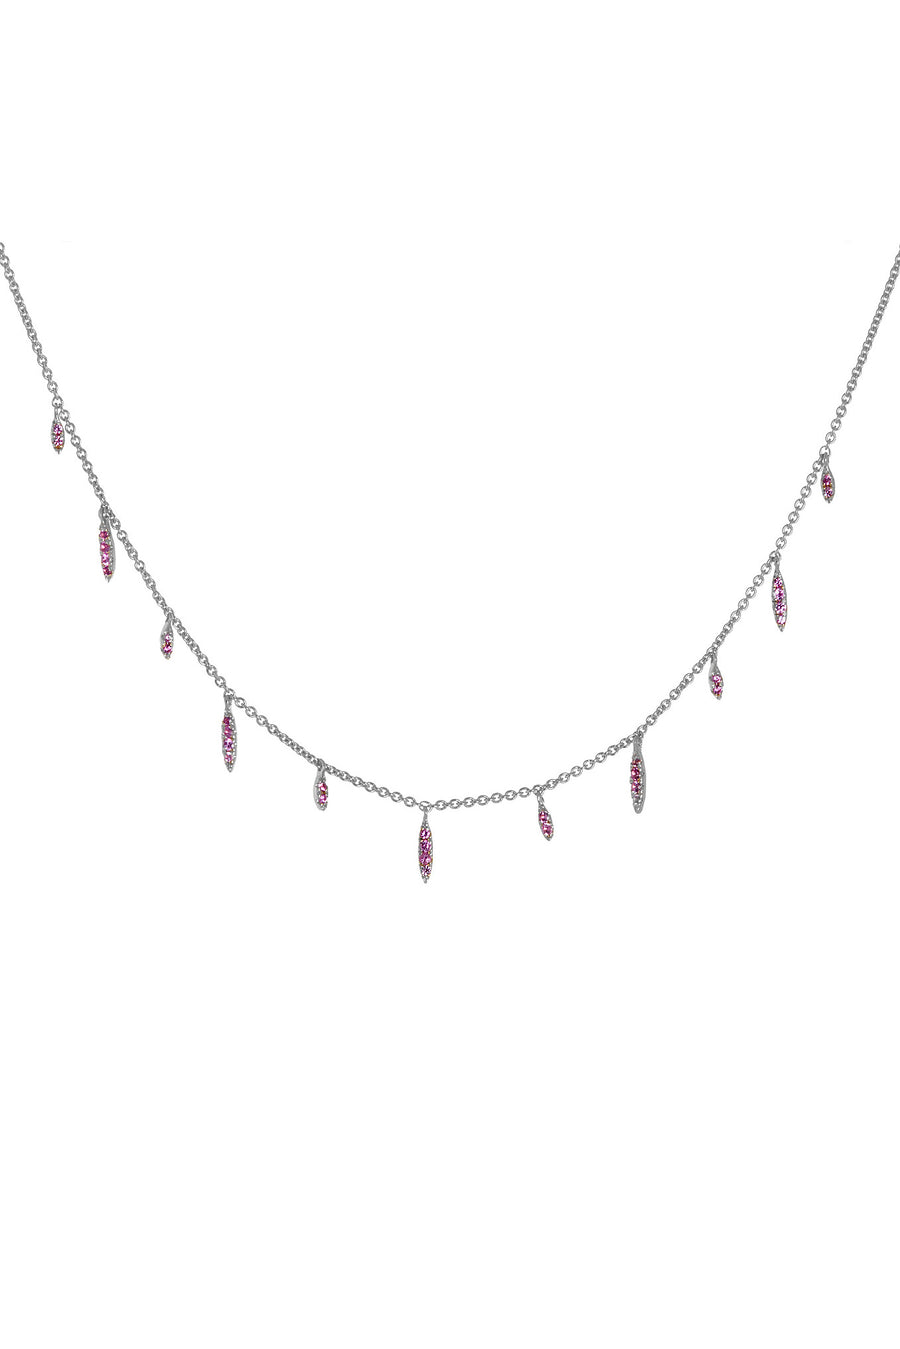 Multi-diamond dangle necklace in 14k gold and pink sapphires